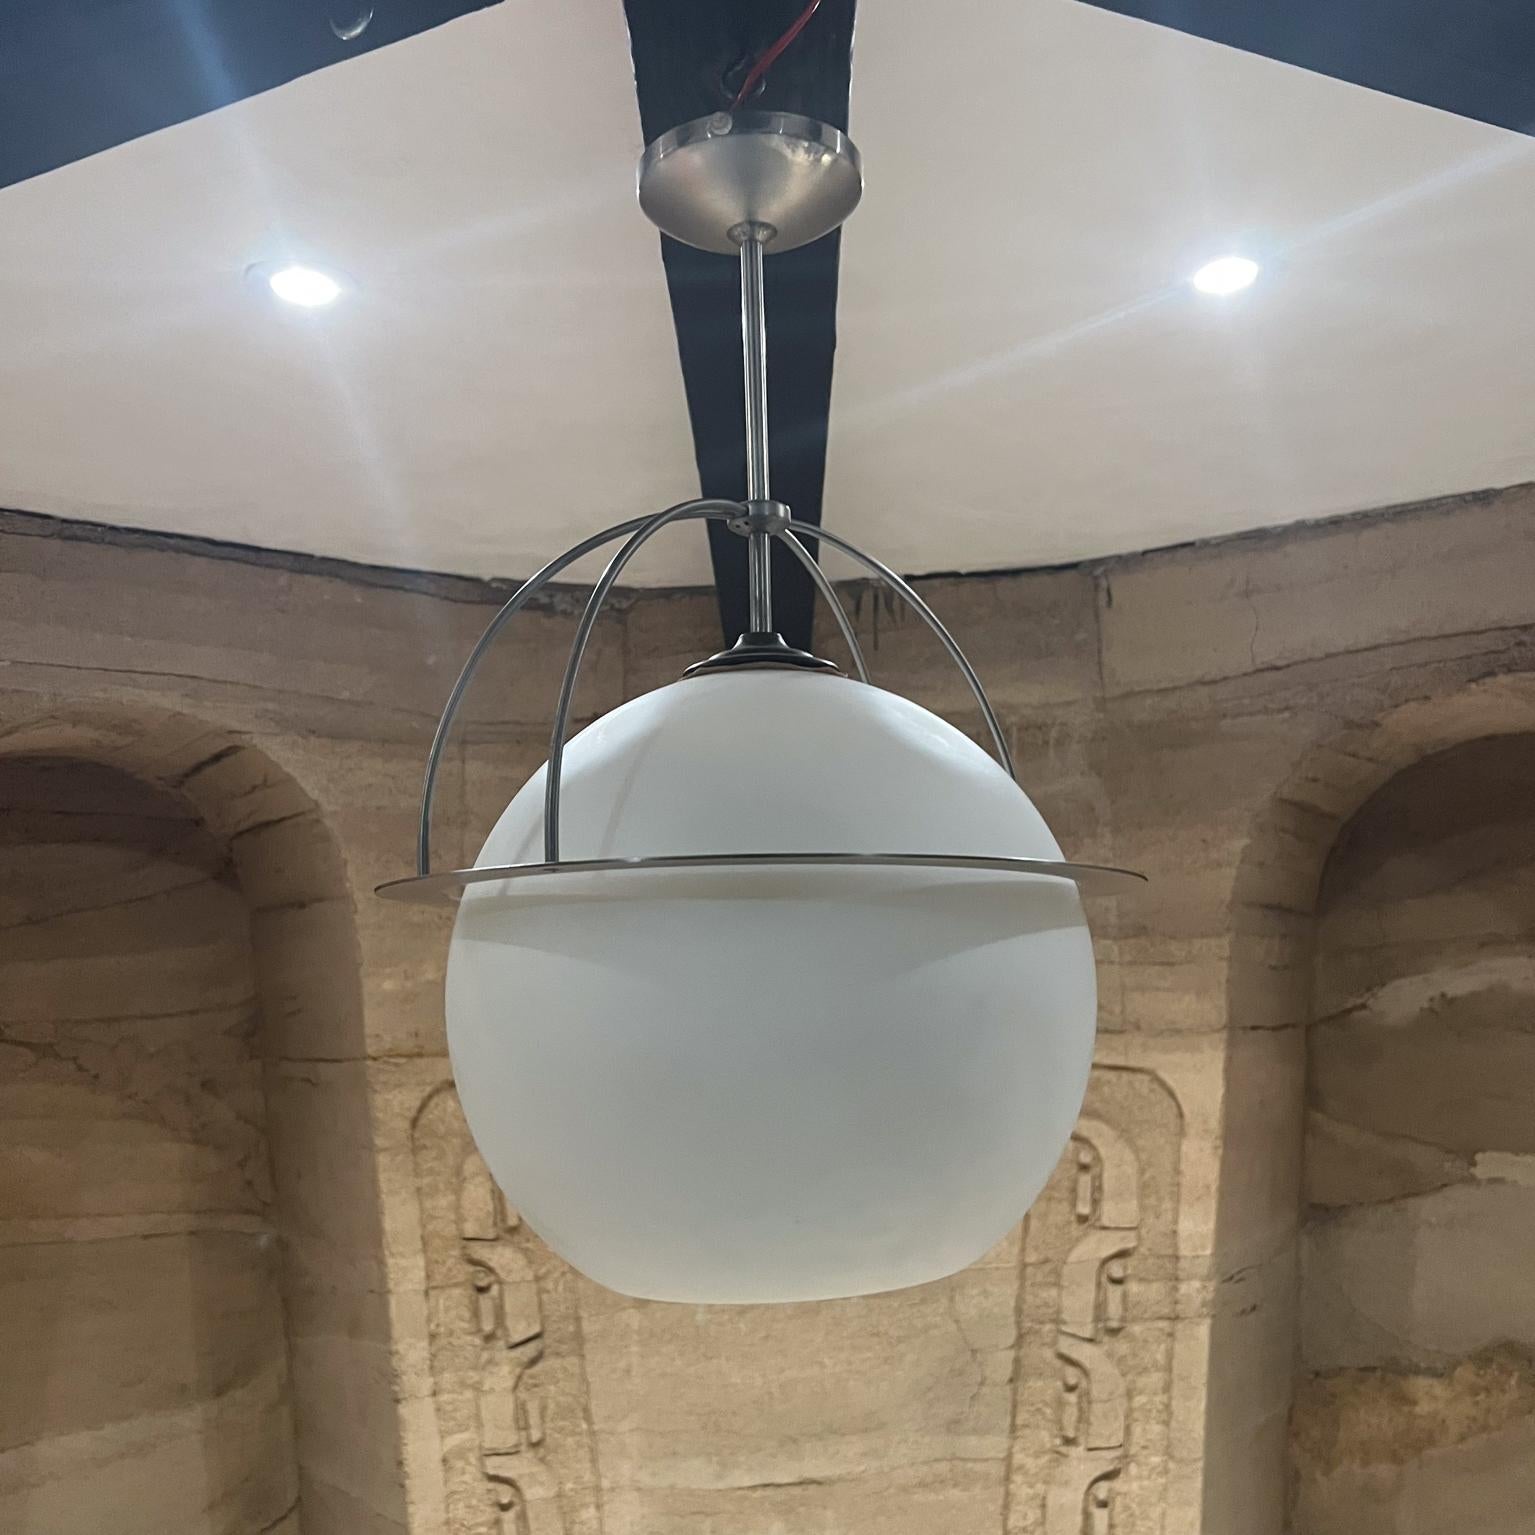 Modern Frosted Glass Globe Pendant Suspension Lamp
25 h x 16 diameter
Preowned unrestored vintage condition
Glass has a crack on top, hard to notice, must be mentioned.
Refer to photos.